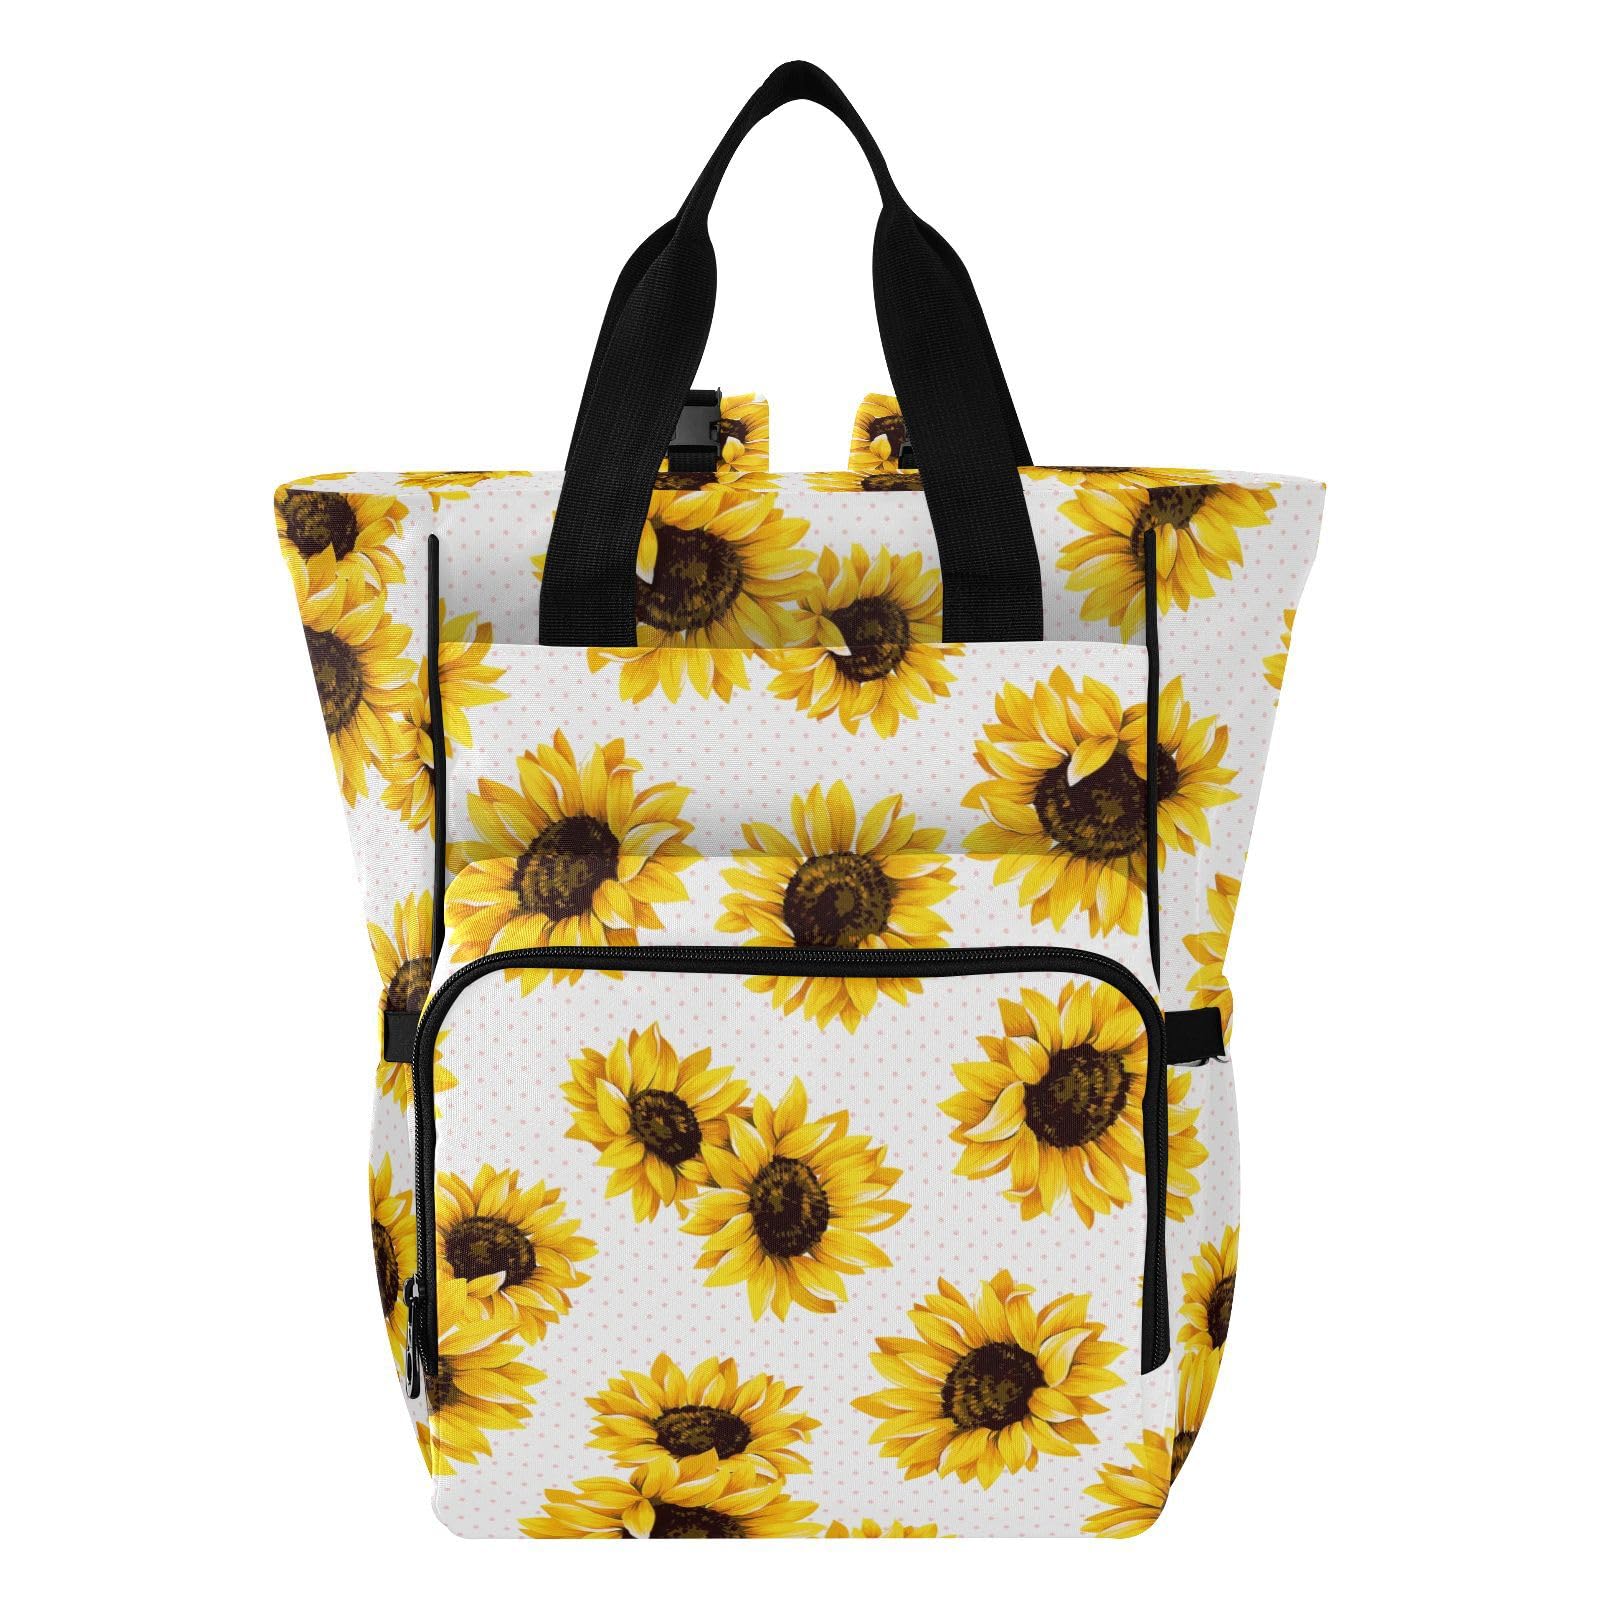 innewgogo Sunflowers Diaper Bag Backpack for Baby Girl Boy Large Capacity Baby Changing Totes with Three Pockets Multifunction Maternity Travel Bag for Playing Shopping Travelling